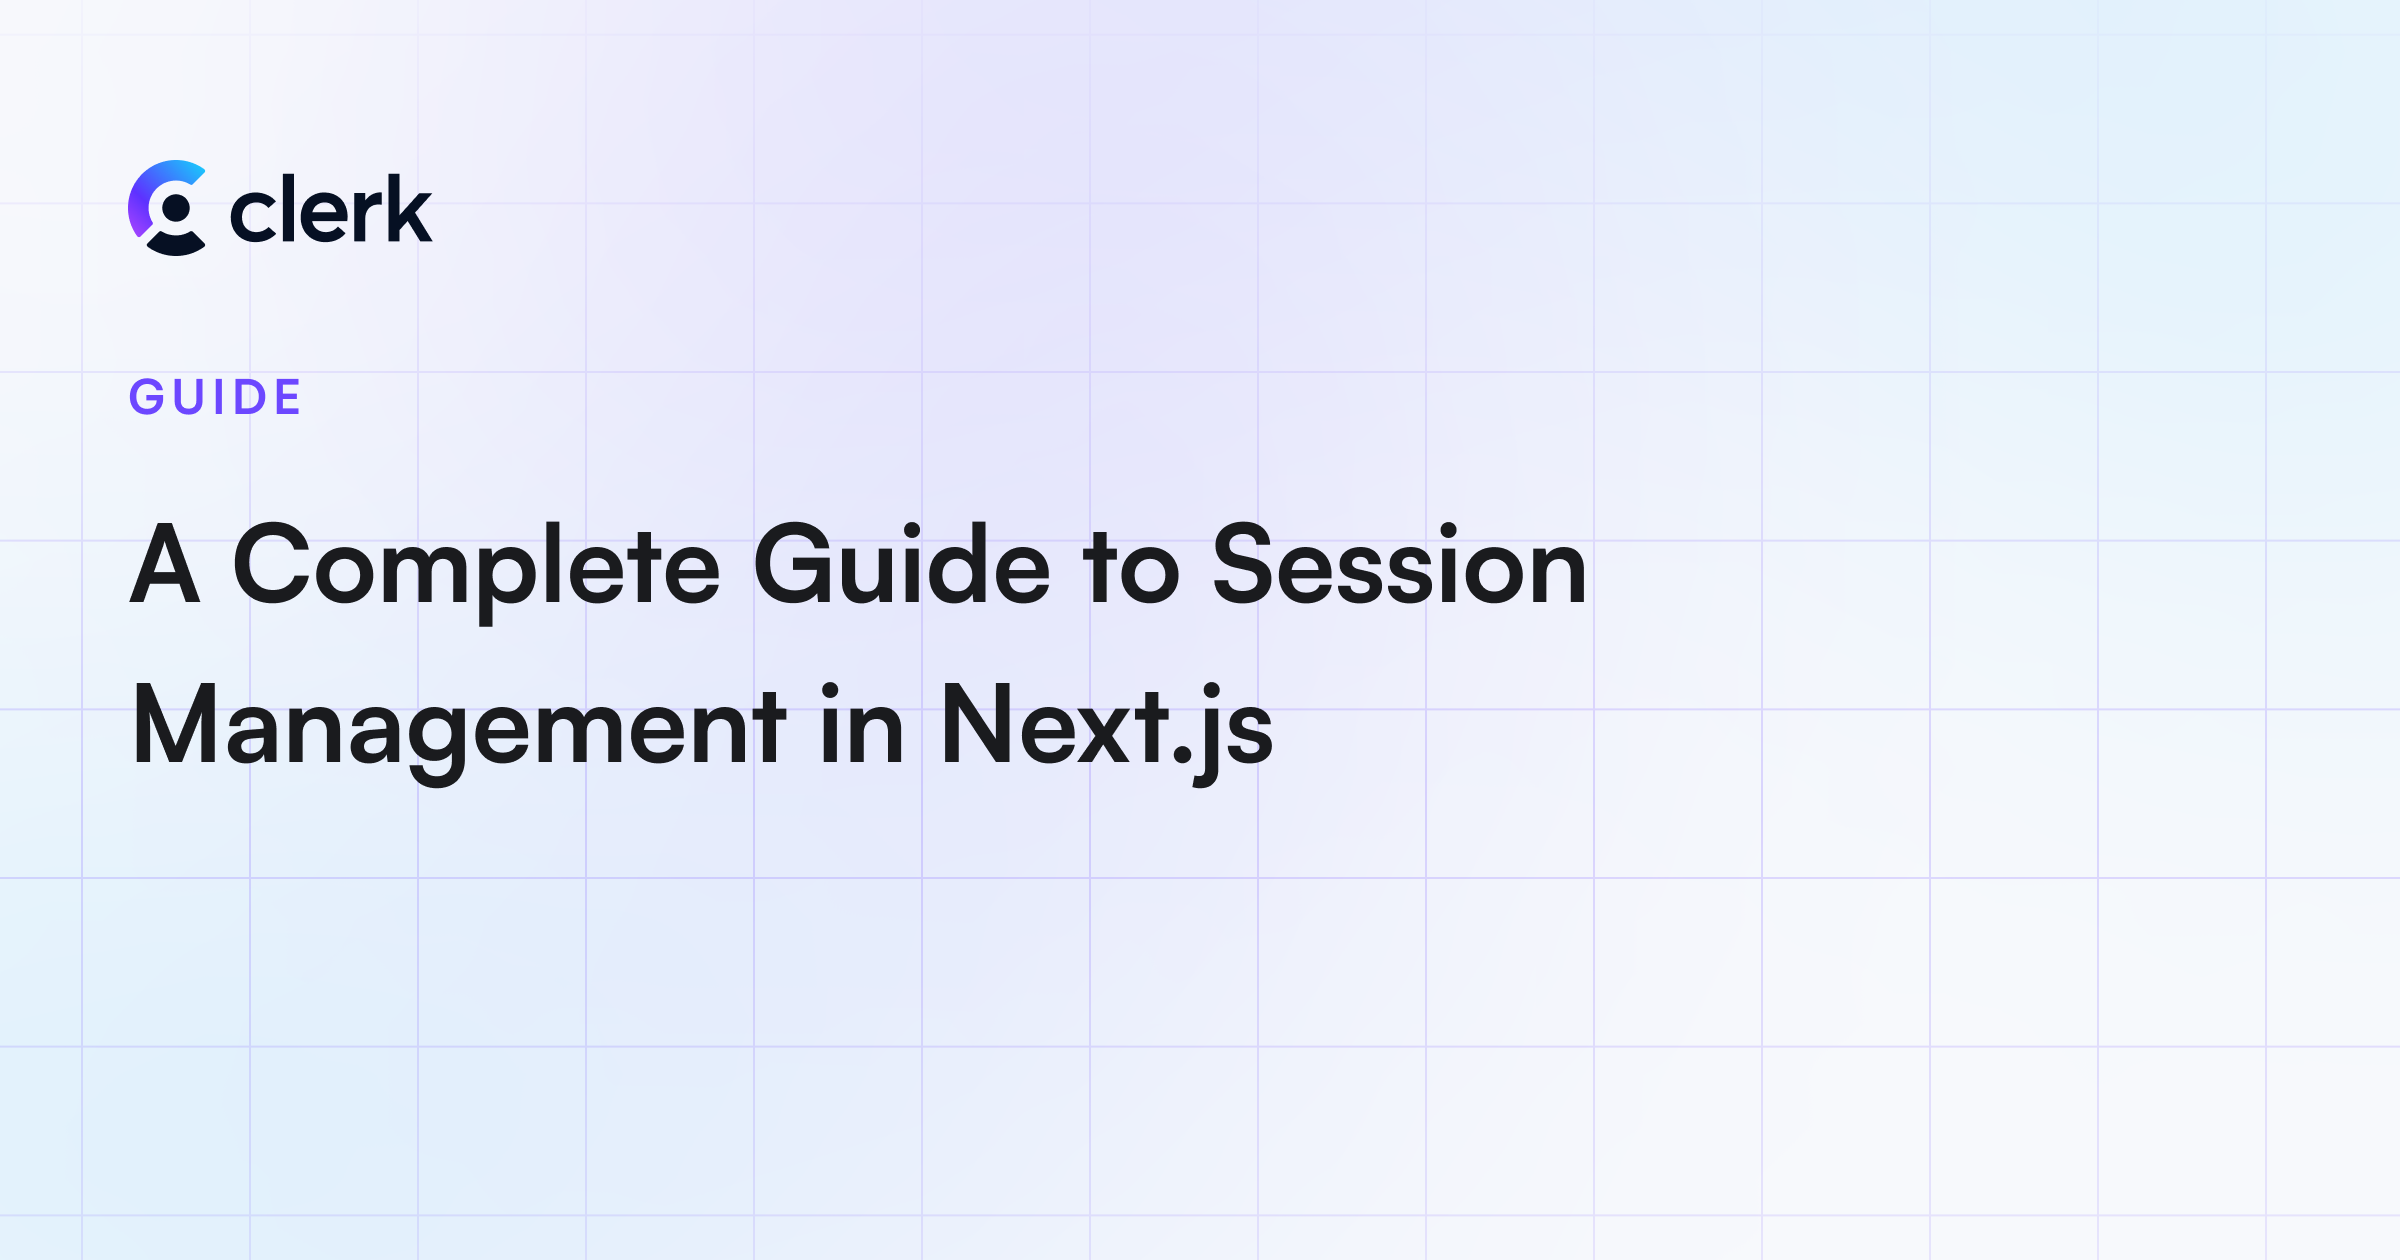 A Complete Guide to Session Management in Next.js